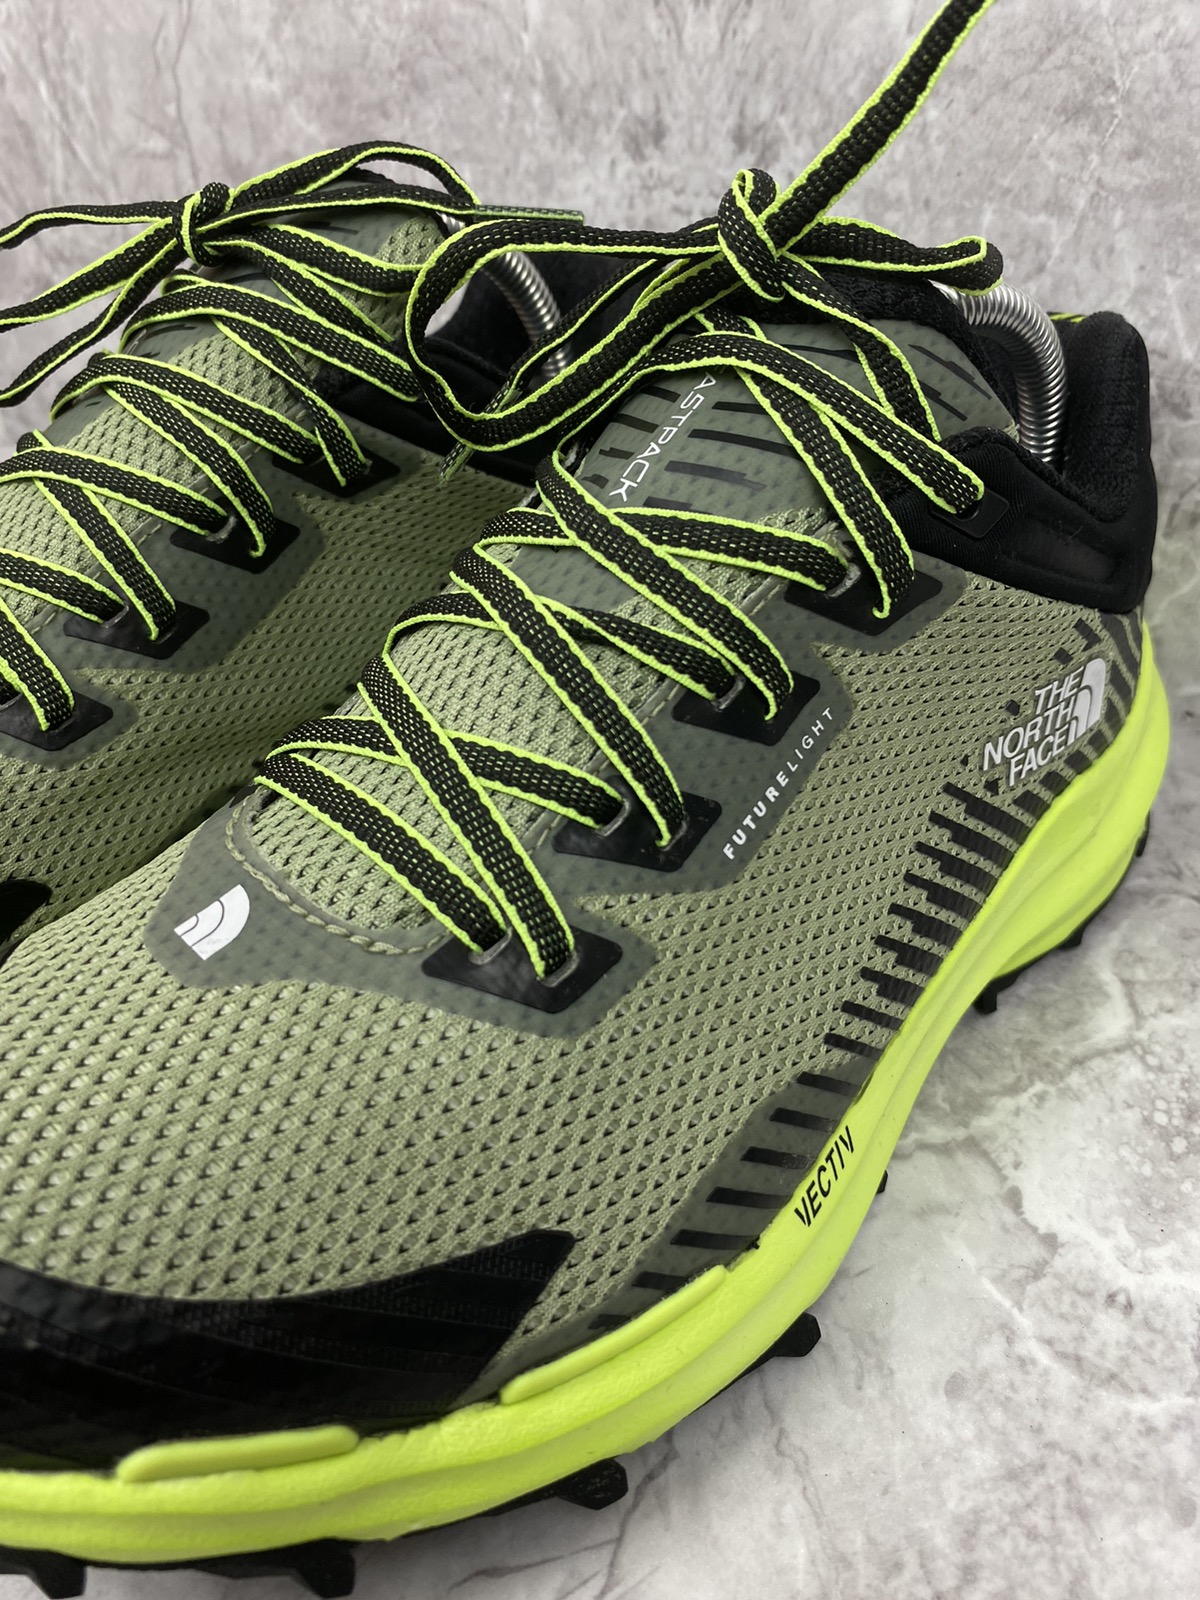 The North Face Vective Fastpack Futurelight Hiking Shoes - 3